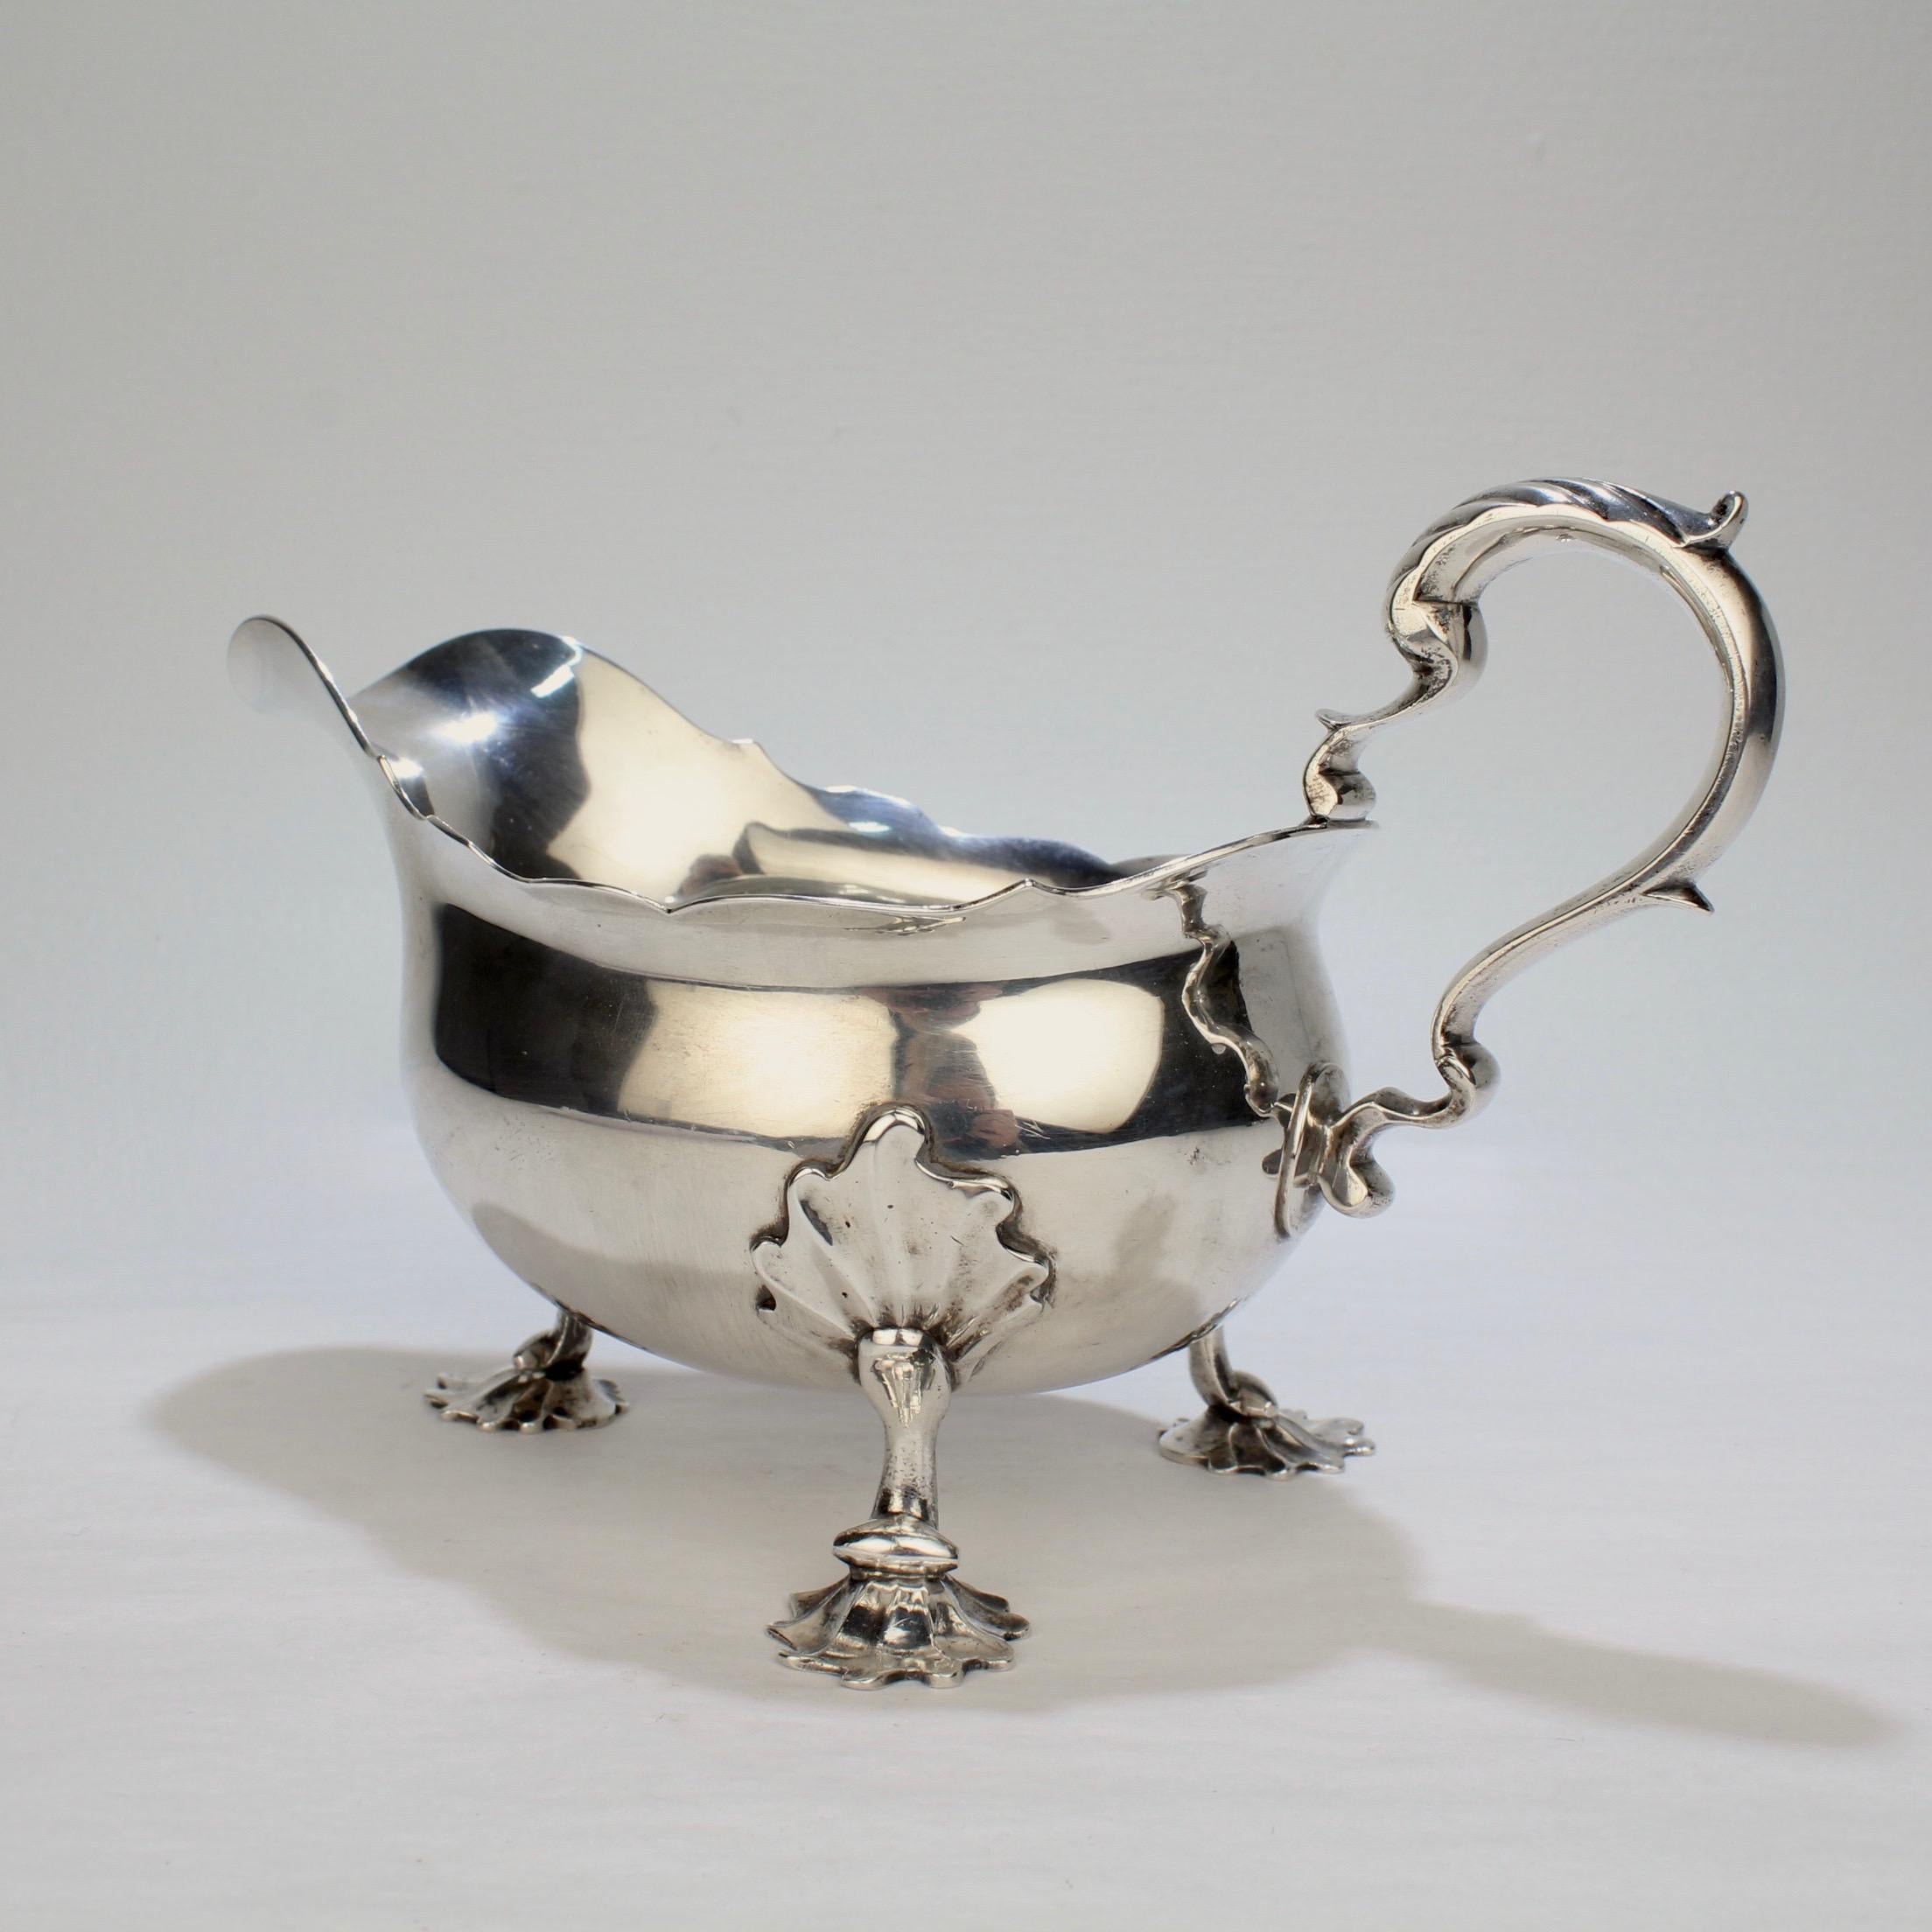 Women's or Men's George II English Sterling Silver Gravy or Sauce Boat by George Hunter, 1751